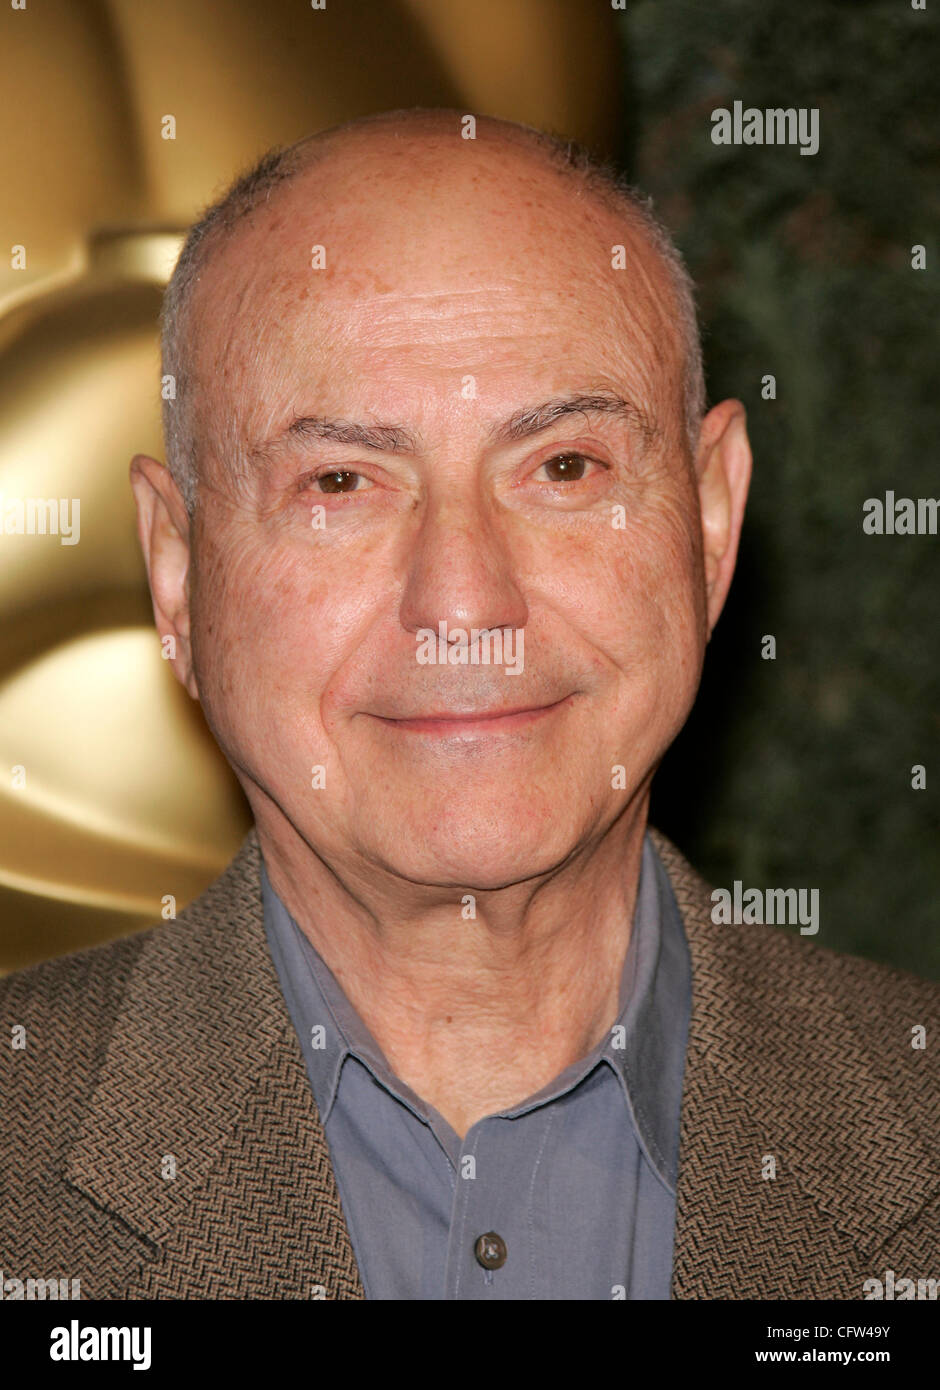 OSCARS 2007 - Actor in a Supporting Role. NOMINEE: ALAN ARKIN - Little Miss Sunshine. NOMINATED ROLE. Alan Arkin portrays the salty, heroin-addicted Grandpa, who joins his family on a road trip to California, where his granddaughter has entered a children's beauty pageant. PICTURED: Feb 05, 2007 - B Stock Photo